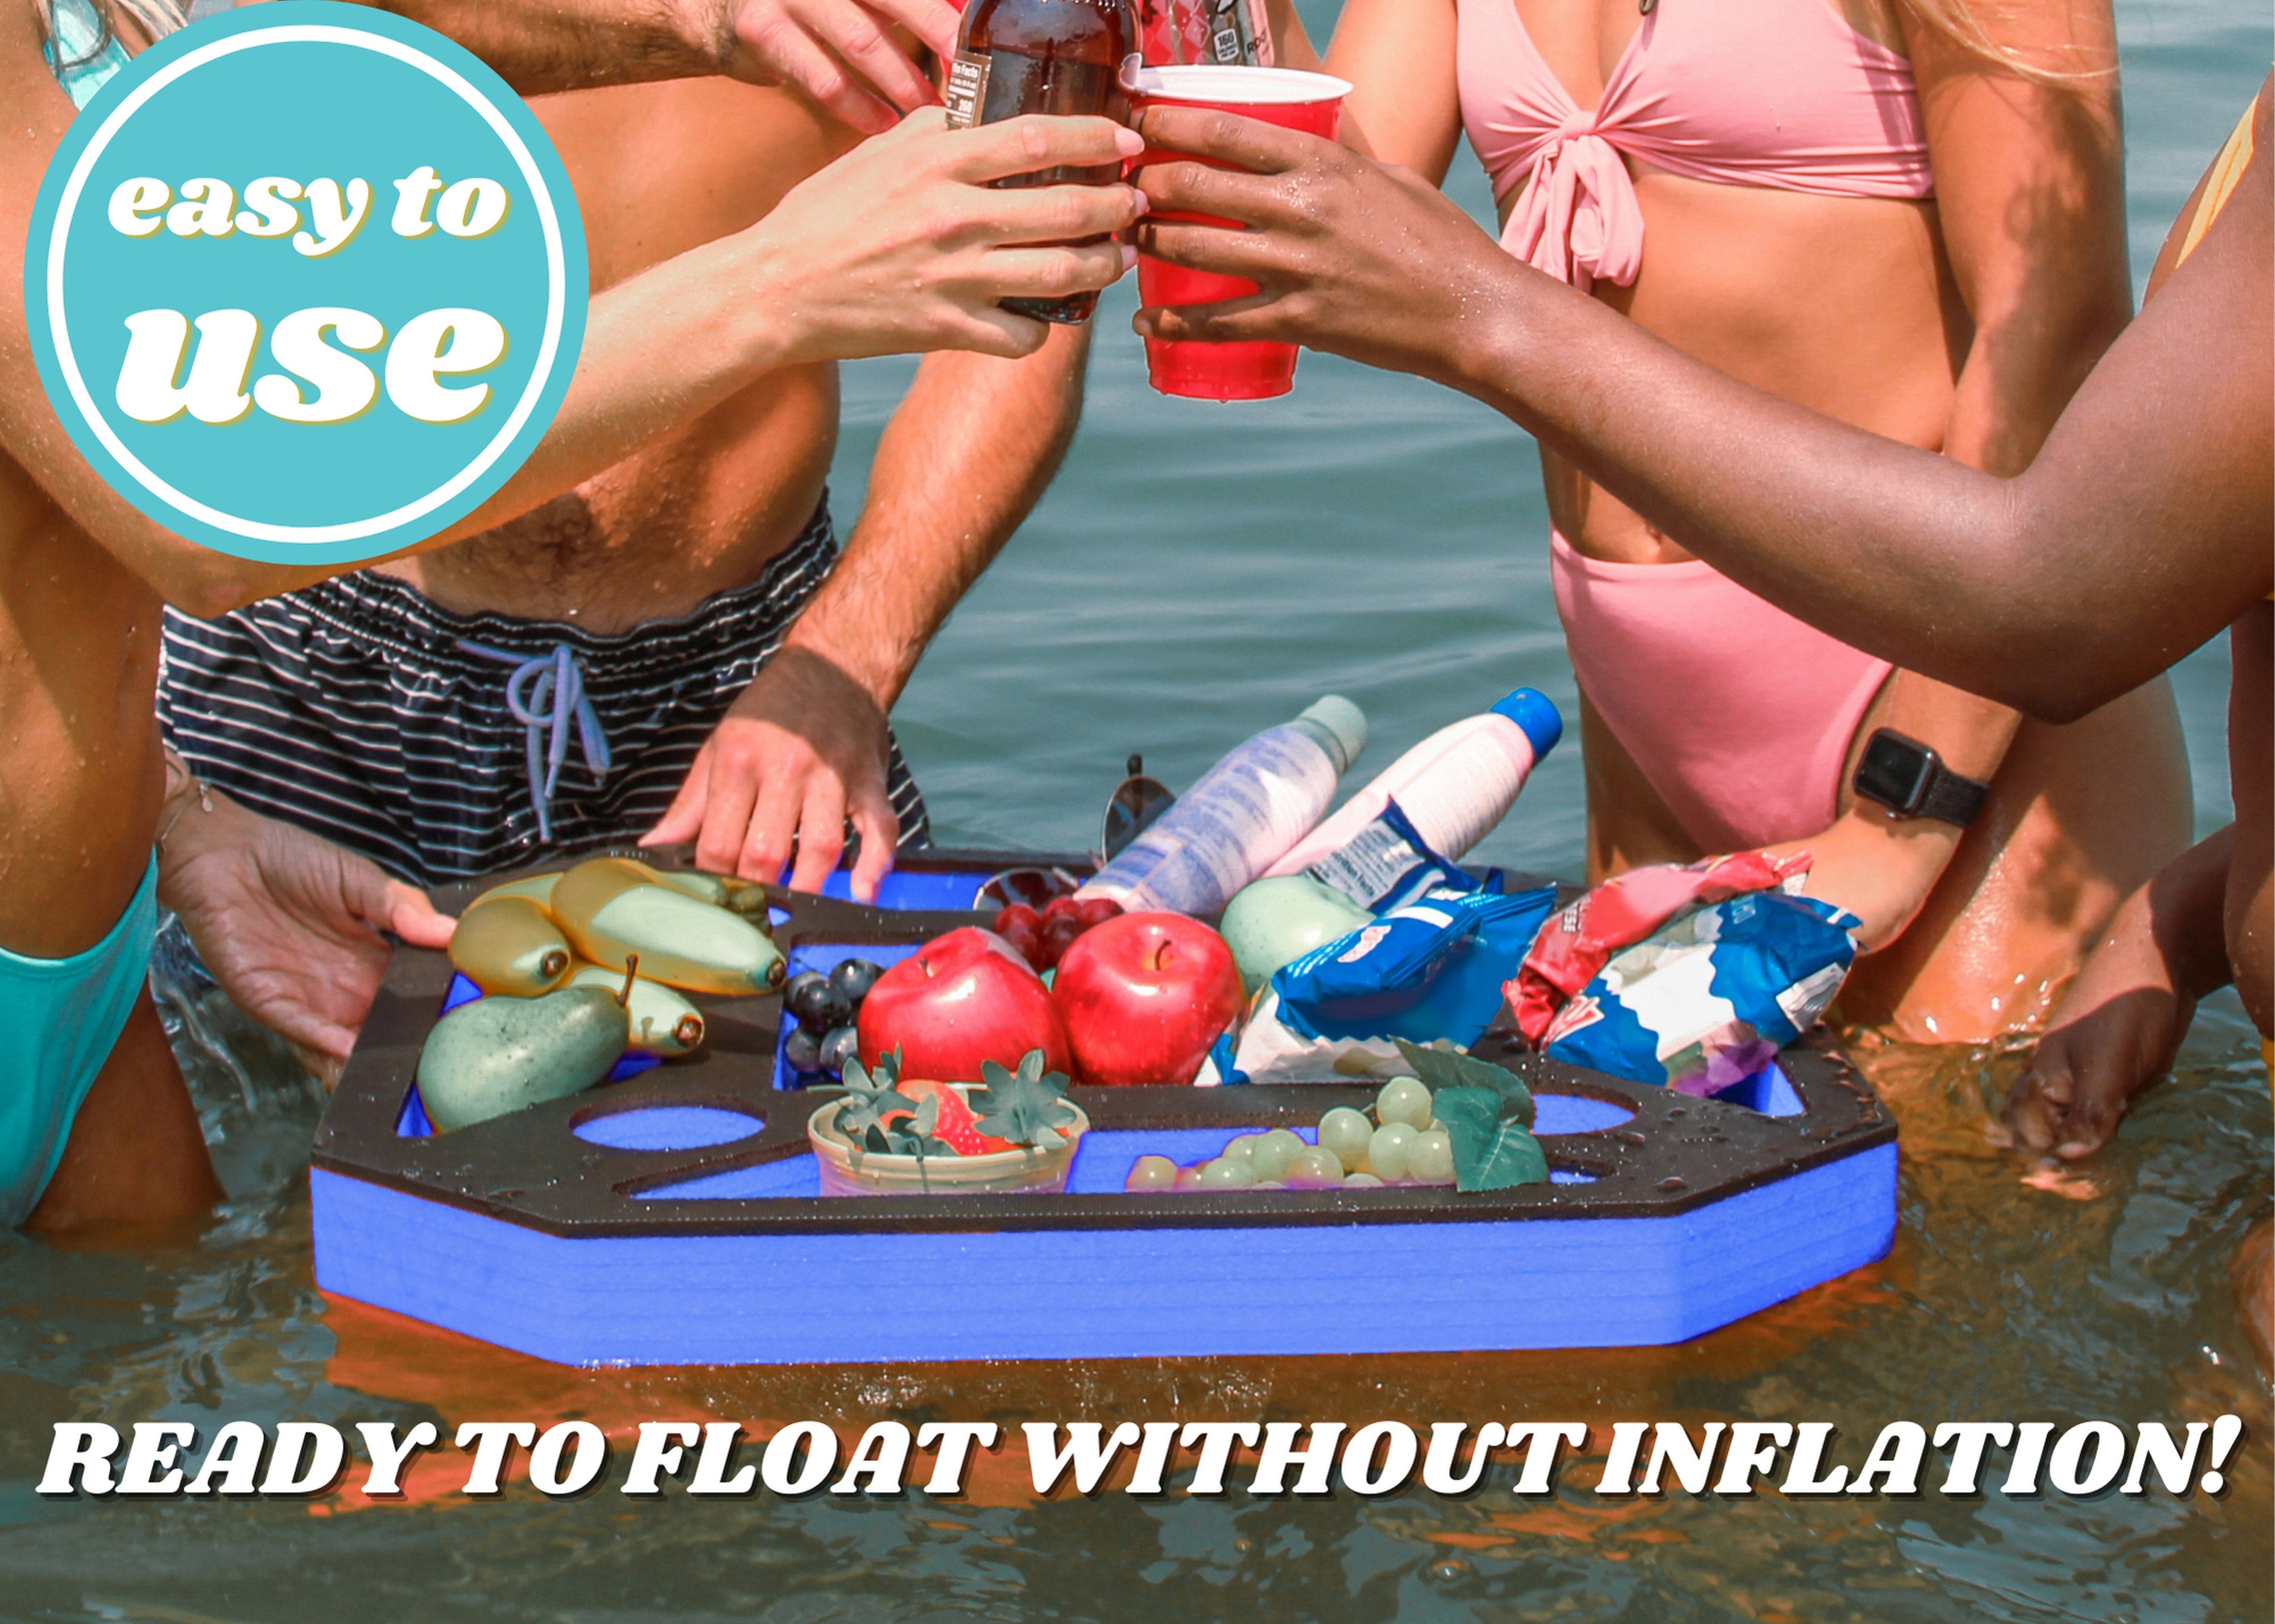 Large Floating Spa Hot Tub Bar Drink Food Table Refreshment Tray PoolBeach Party Float Lounge Durable Foam 23.5 Inches 9 Compartment UV Resistant